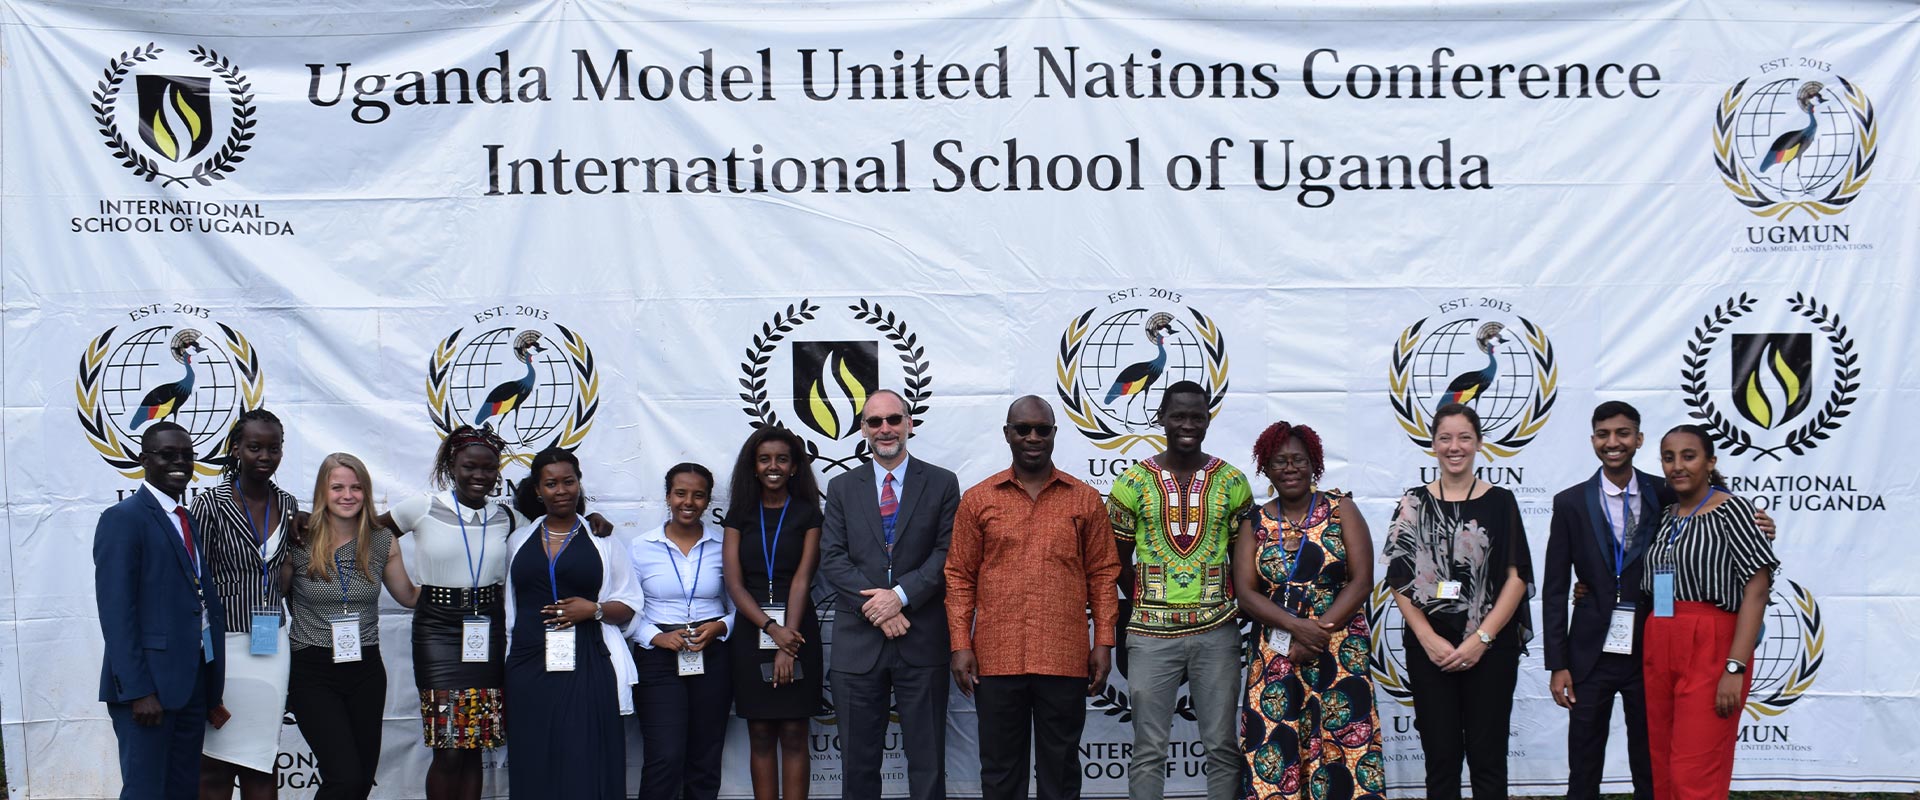 Students and teachers standing in front of a banner that reads 'Uganda Model United Nations Conference International School of Uganda'